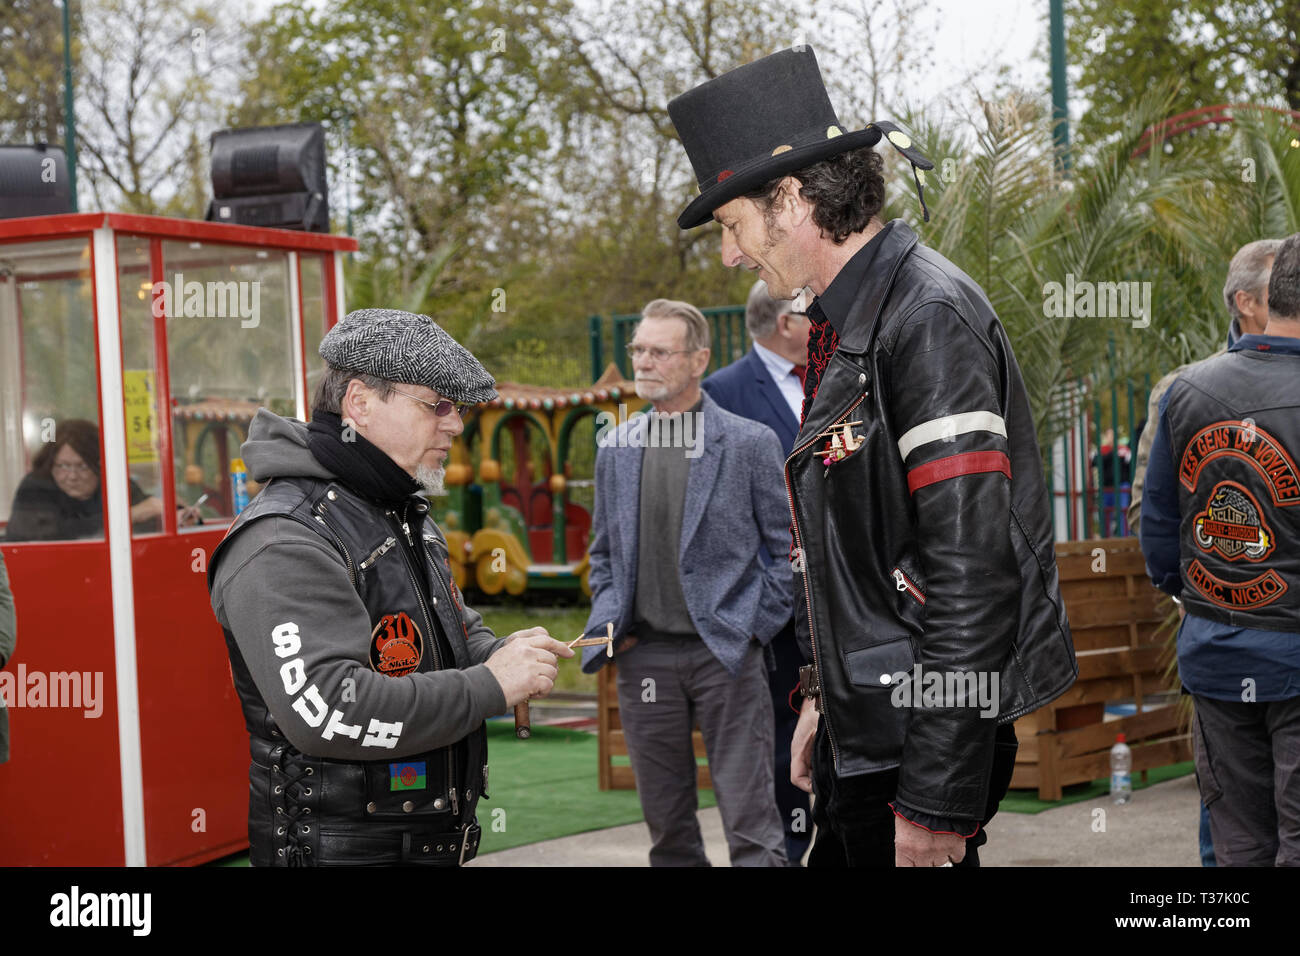 Paris, France, 5th April 2019. Pascal Fousset and a biker attend the Inauguration of the Fair of Trone 2019 at the lawn of Reuilly on April 5, 2019 Stock Photo